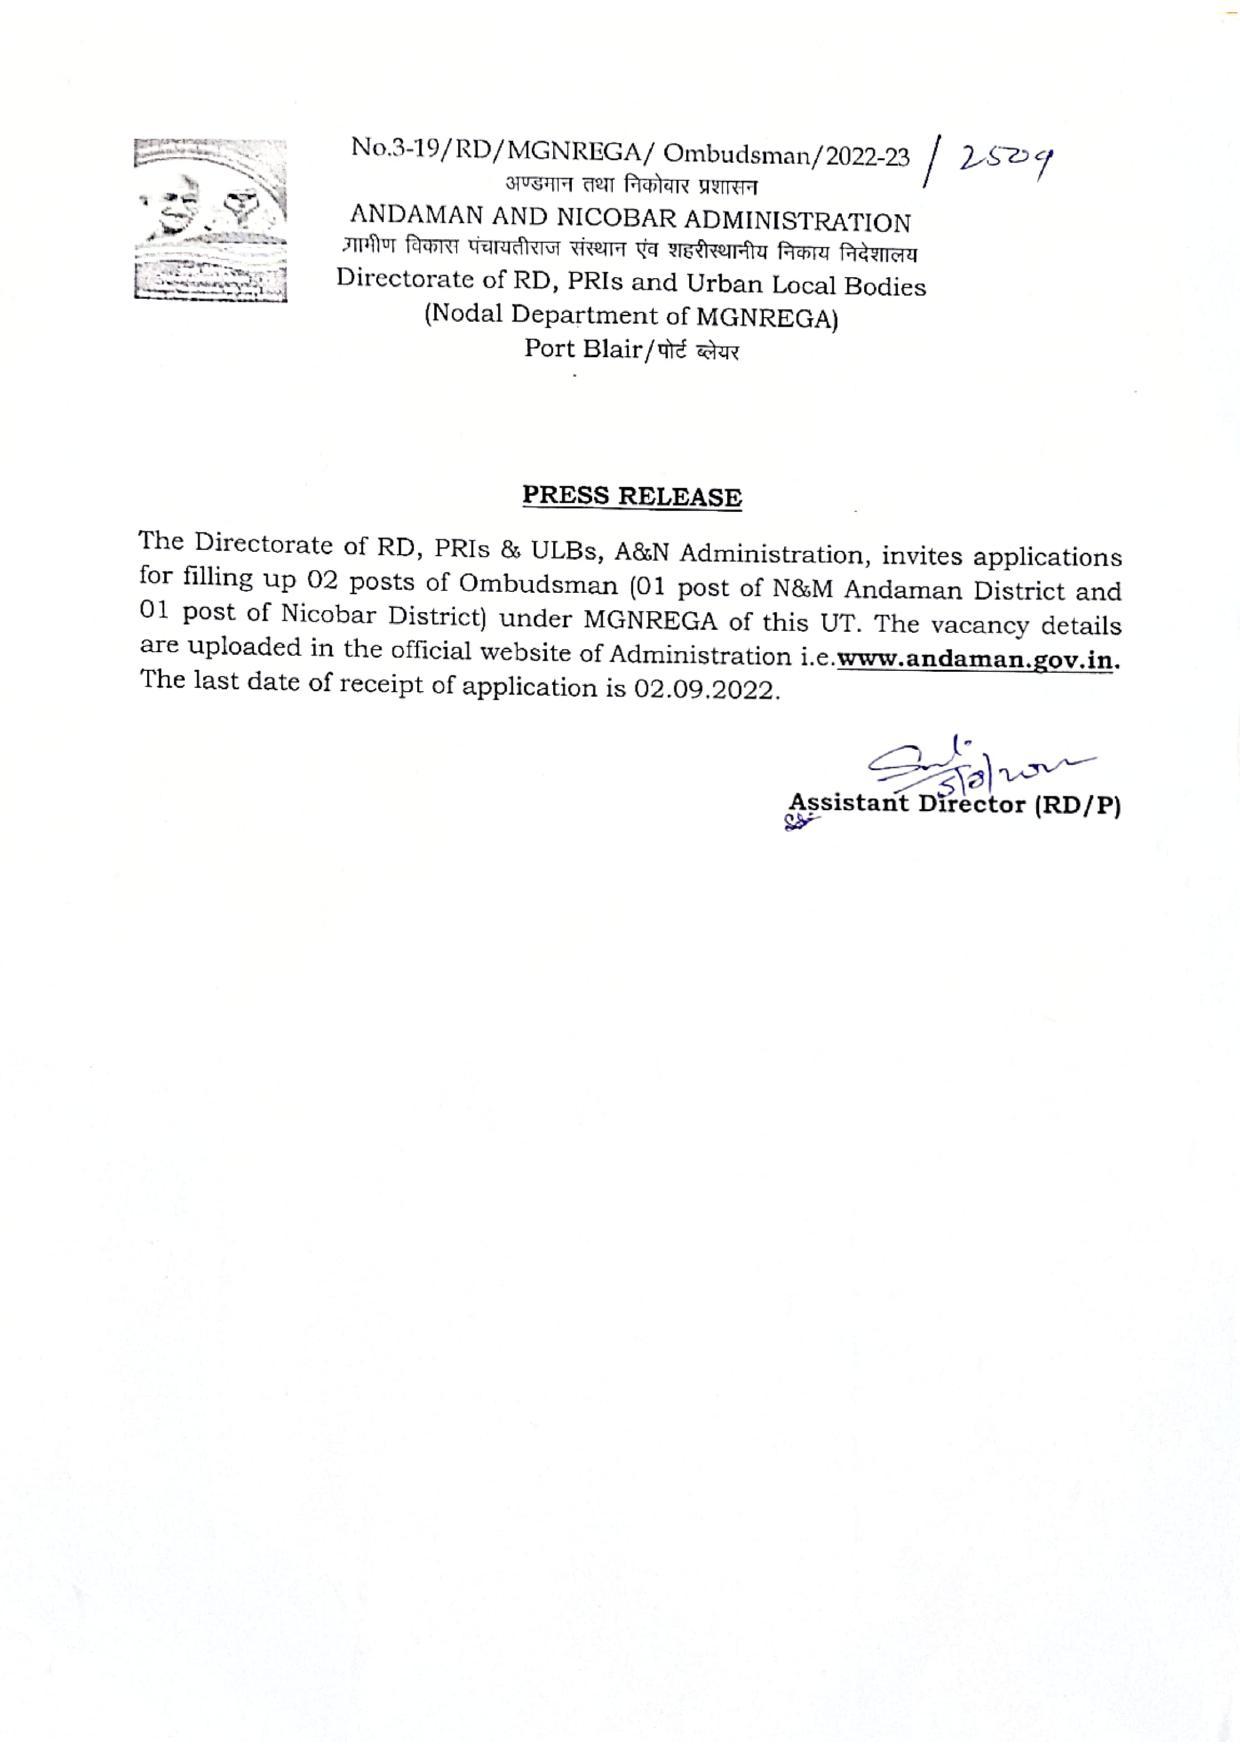 Andaman & Nicobar Administration Invites Application for Ombudsman Recruitment 2022 - Page 3